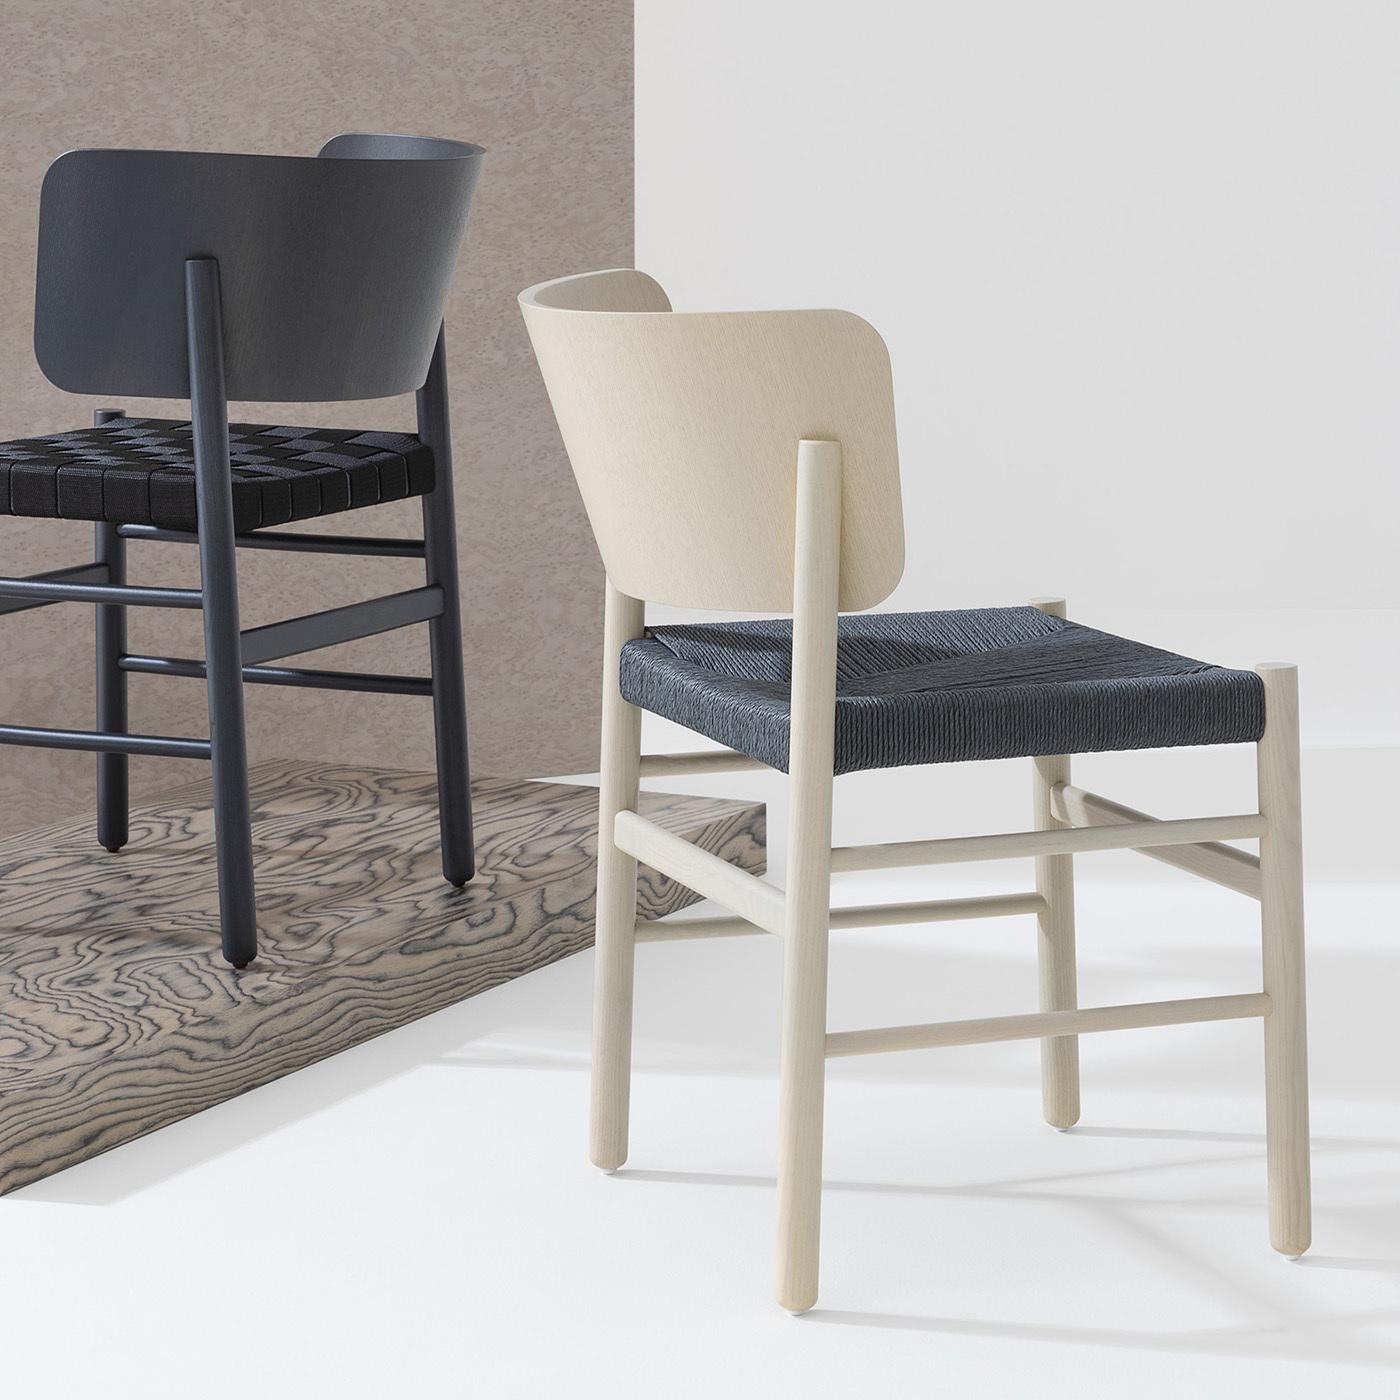 Smartly reprocessing a traditional design in an innovative way, this superb chair designed by Emilio Nanni manages to upgrade the aesthetic of any decor without stealing the scene. The sleek frame comprising the enveloping, open backrest is